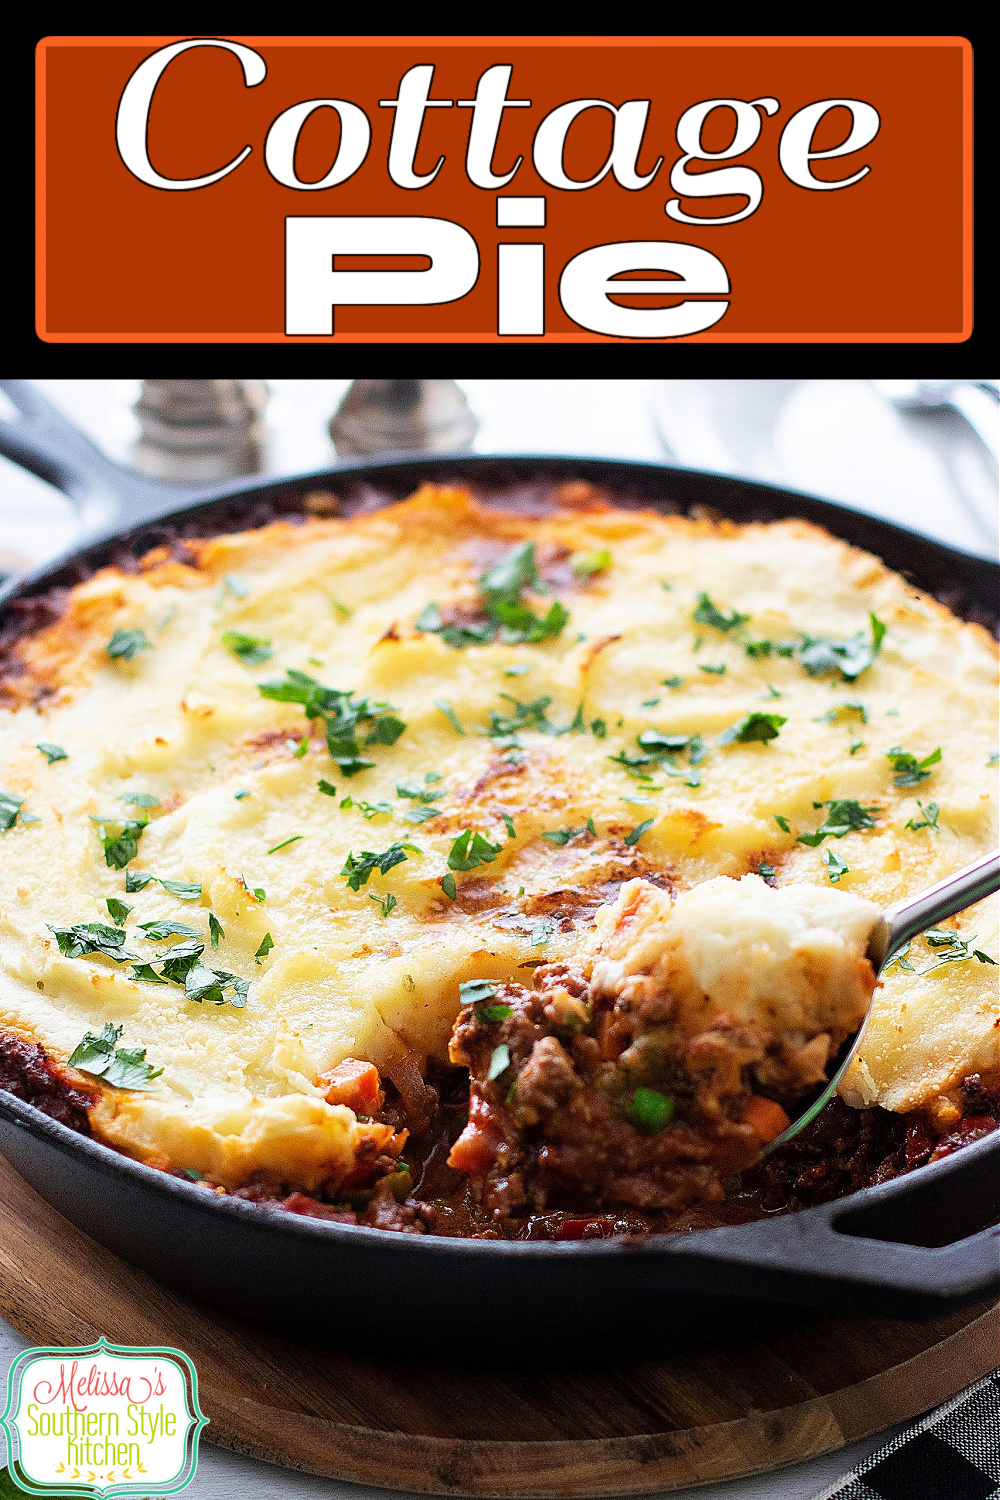 This mashed potato topped Cottage Pie features a flavorful ground beef and mixed vegetable filling that's simmered in a rich tomato sauce #cottagepie #pierecipes #shepherdspie #easygroundbeefrecipes #easypotpies #dinnerideas #groundbeef #mashedpotatoes #pies via @melissasssk